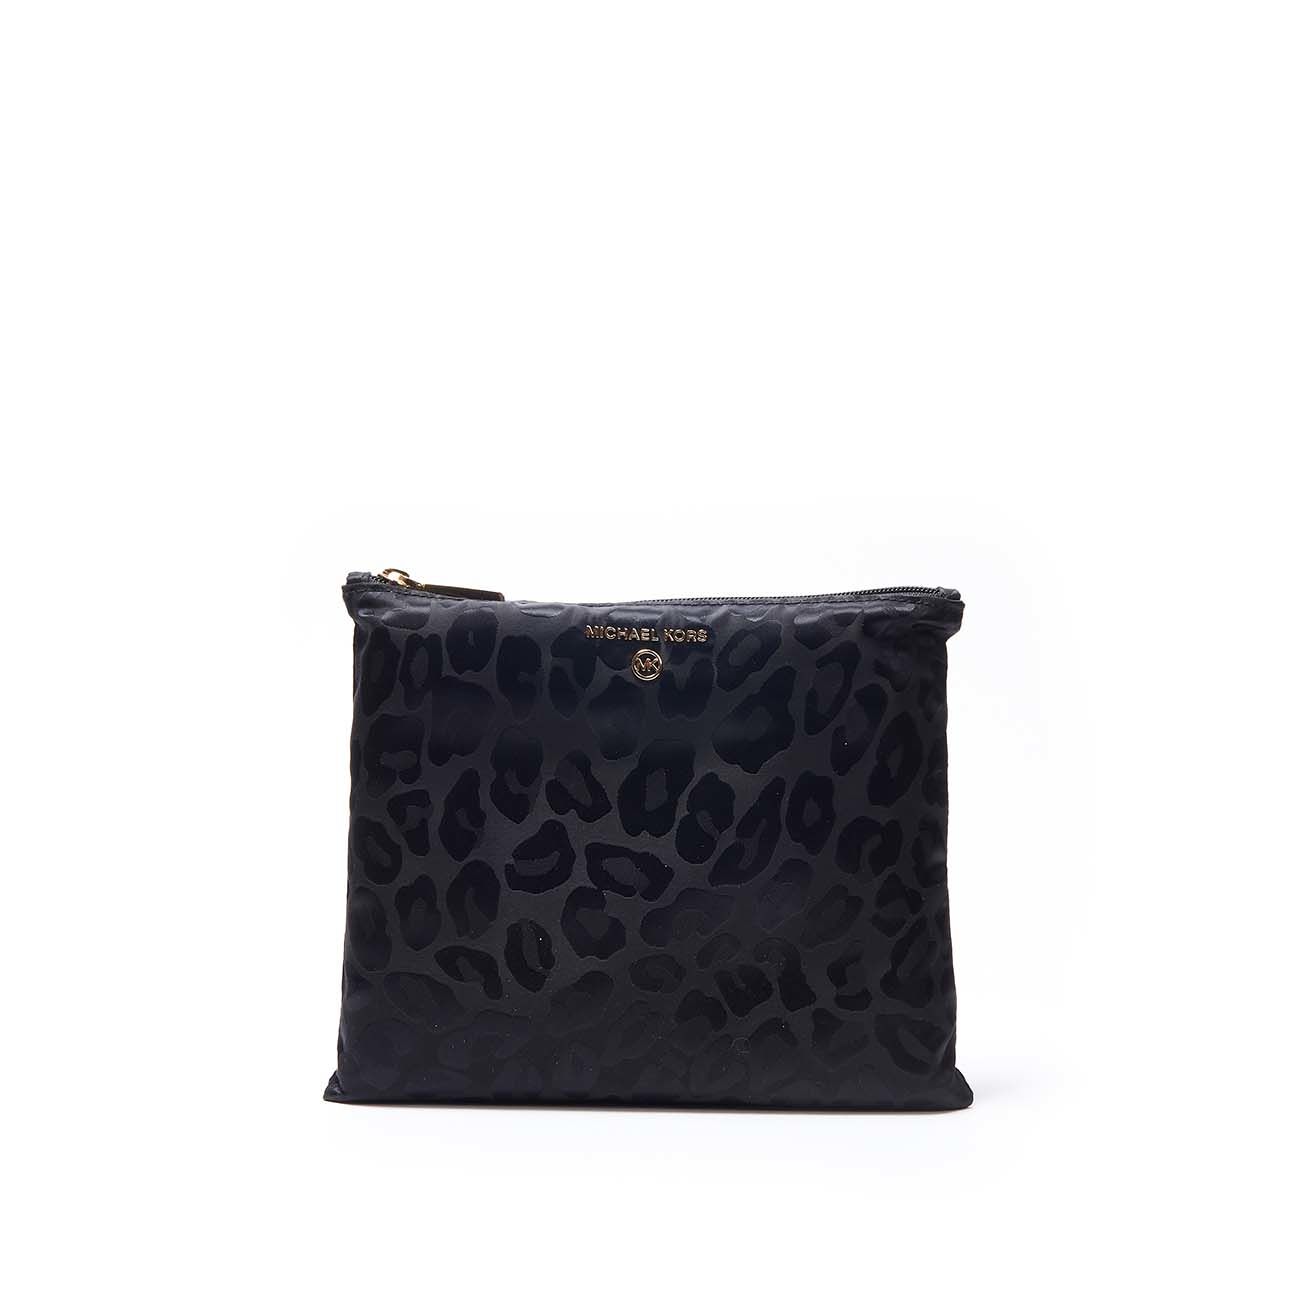 Boden Bags, Description: This beautifully constructed navy blue crossbody  messenger bag is a wonderful addition to any closet.